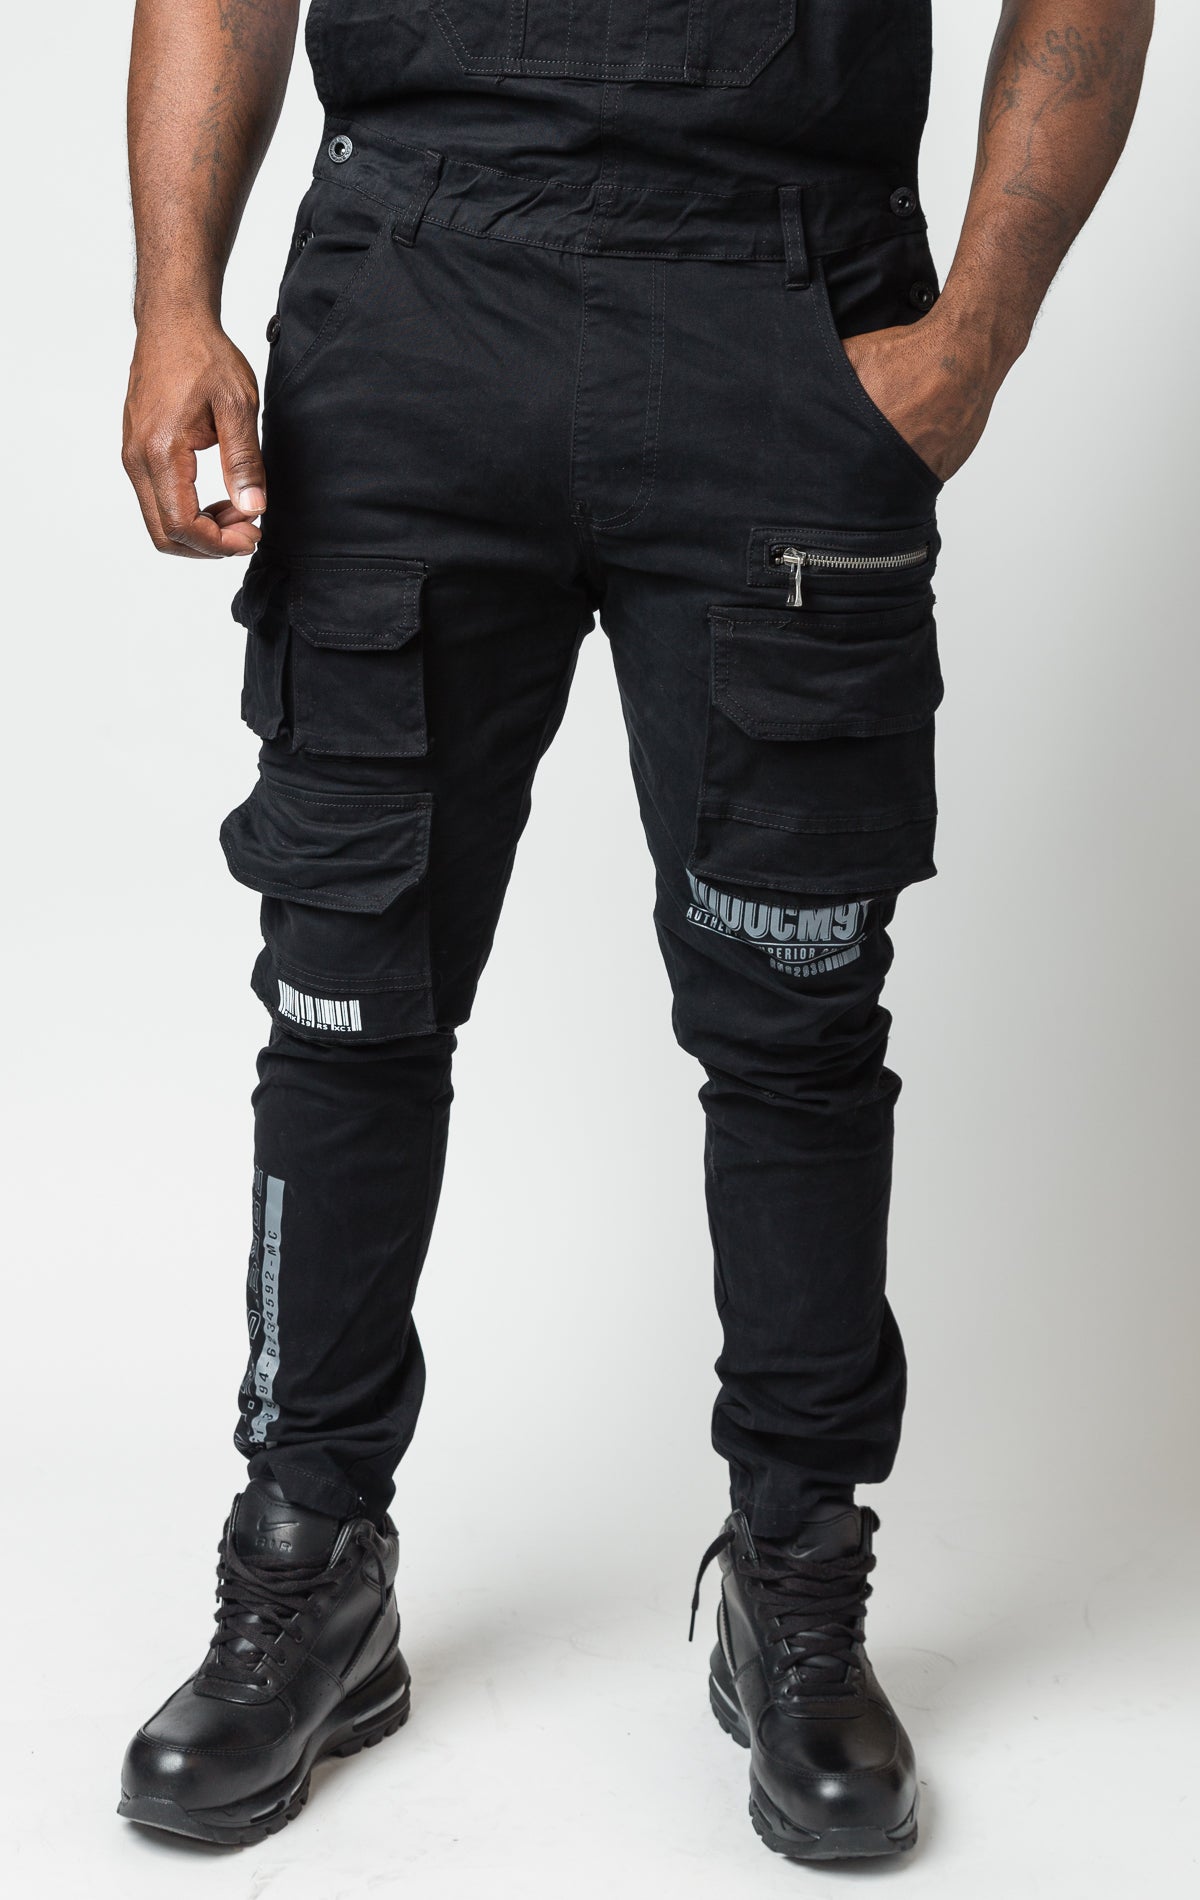 black Cotton twill overalls with cargo pockets and adjustable shoulder straps.